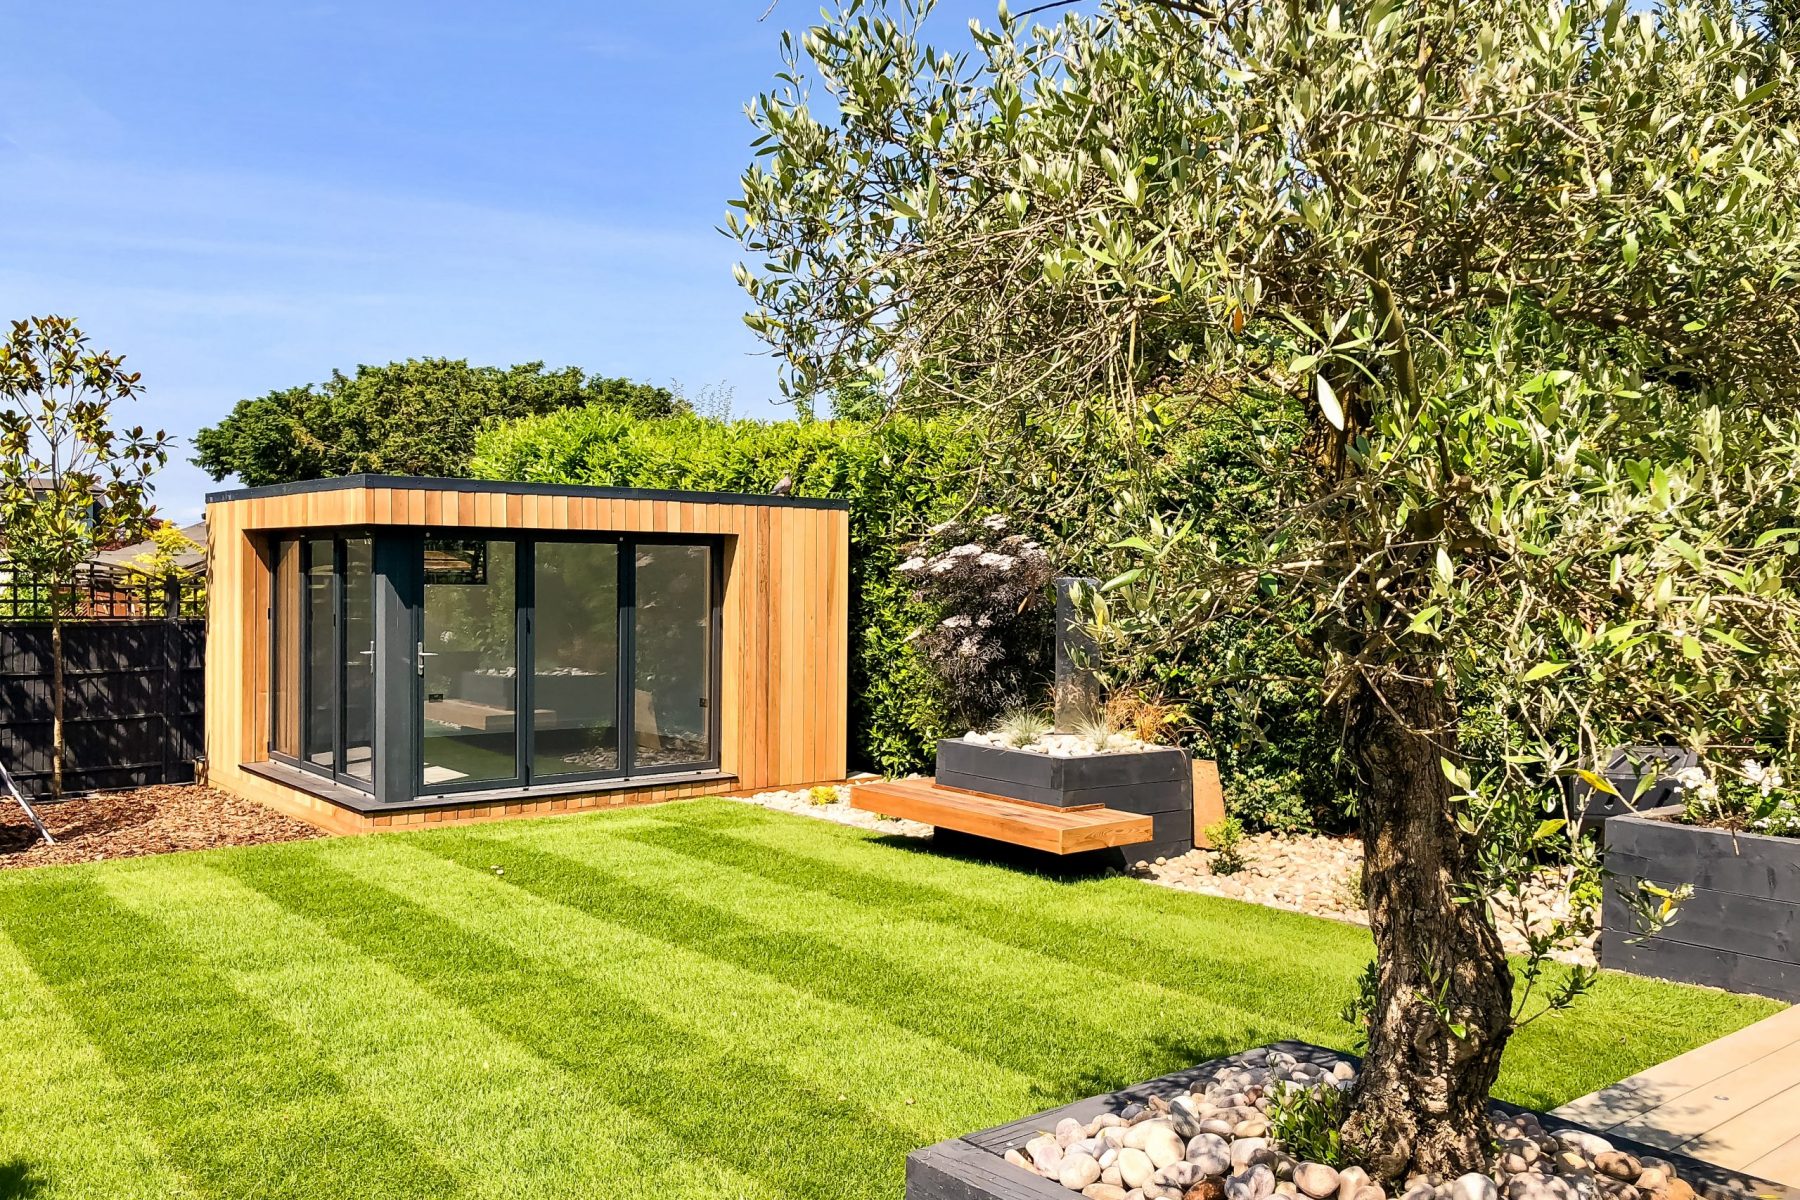 Exterior day view of a small Vivid Green garden office with closed anthracite grey framed corner glass bi-fold doors, surrounded by tall hedges and grass, with a wooden bench to the right and a tree in the foreground